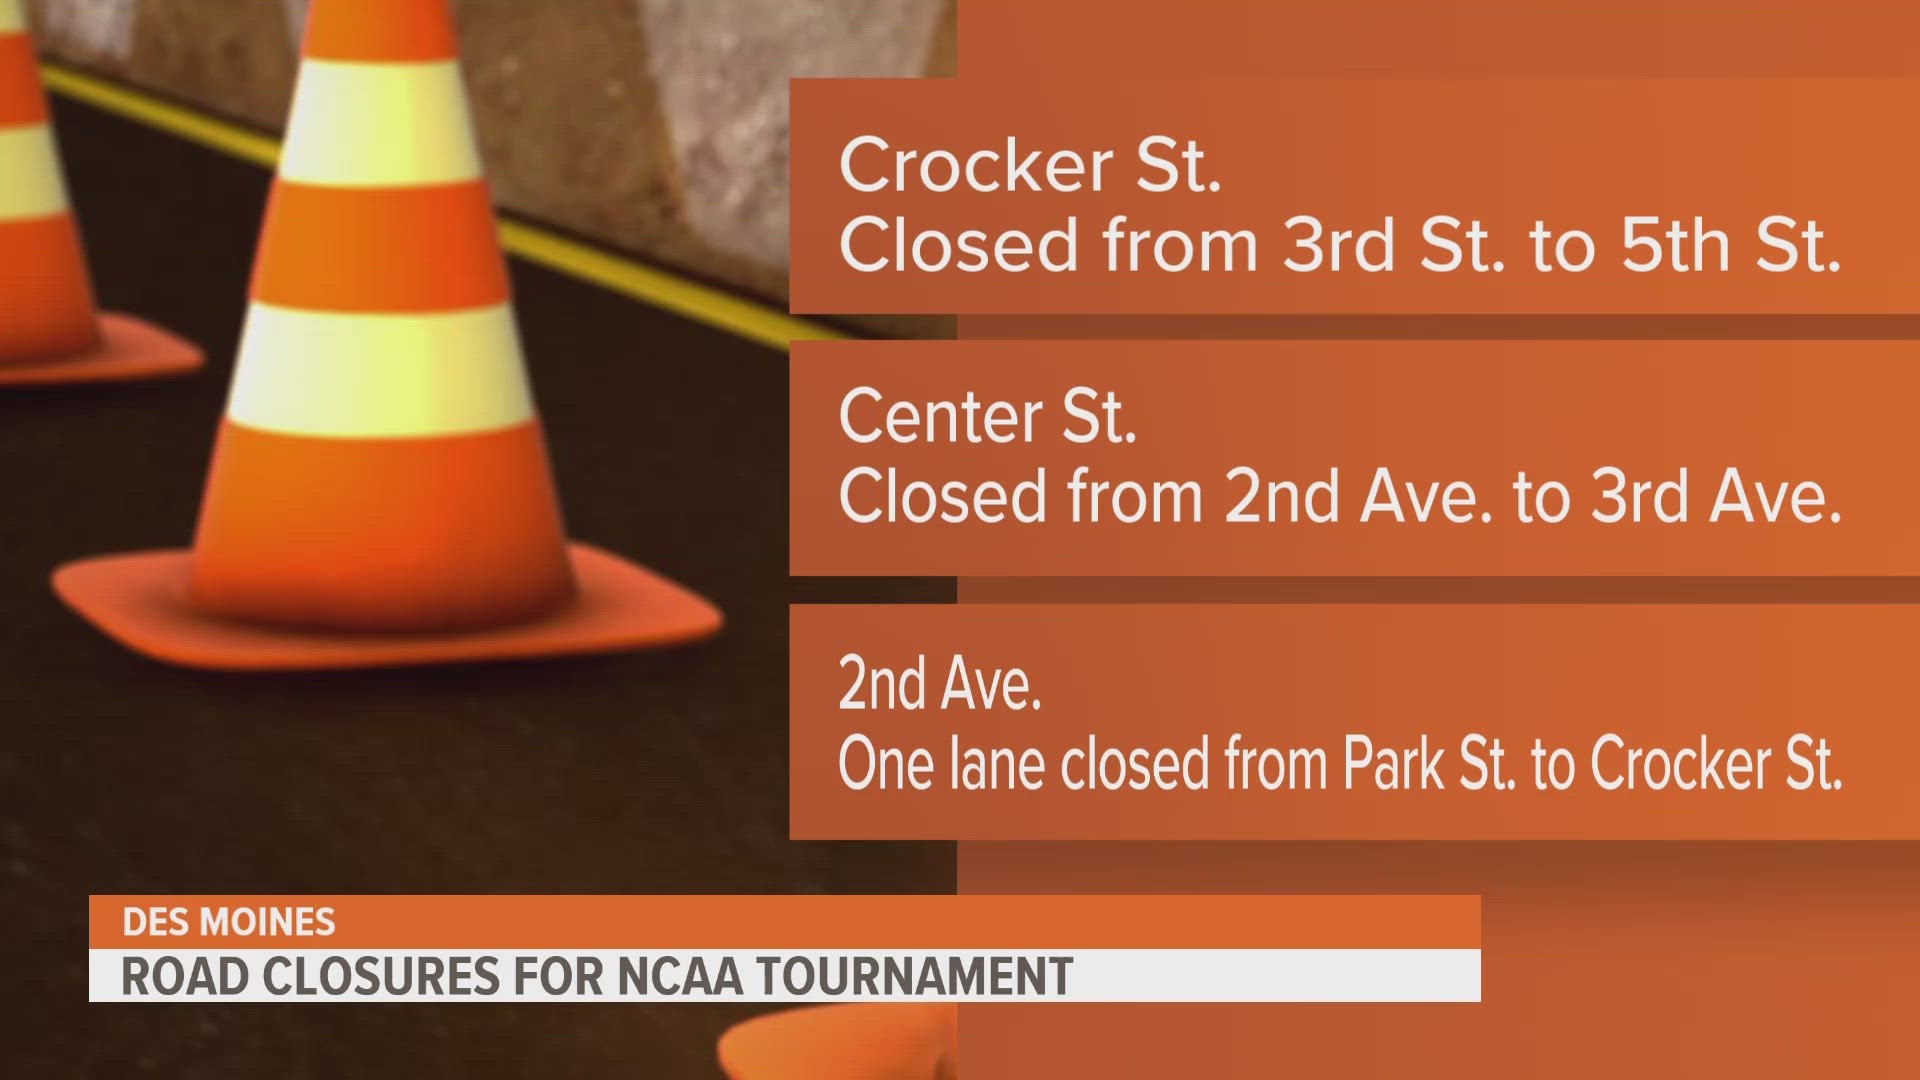 Some roads in downtown Des Moines are closed for the 2023 NCAA Men's Basketball Tournament. Here's what you need to know.